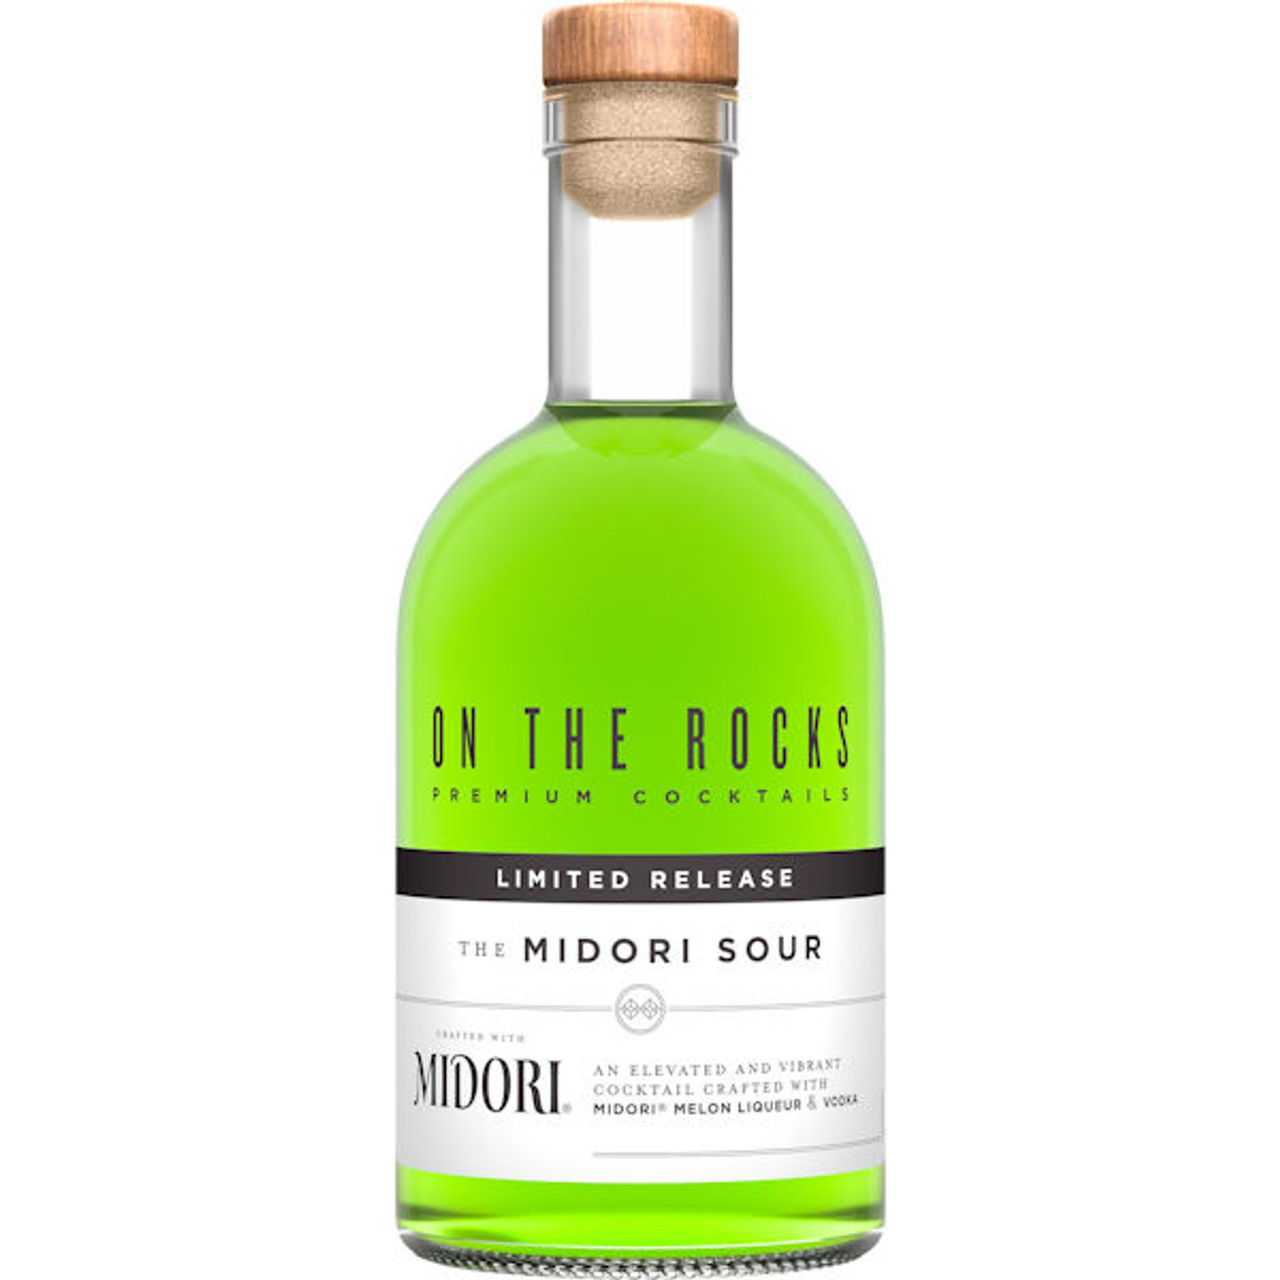 On The Rocks Midori Sour Ready To Drink Cocktail 375ml